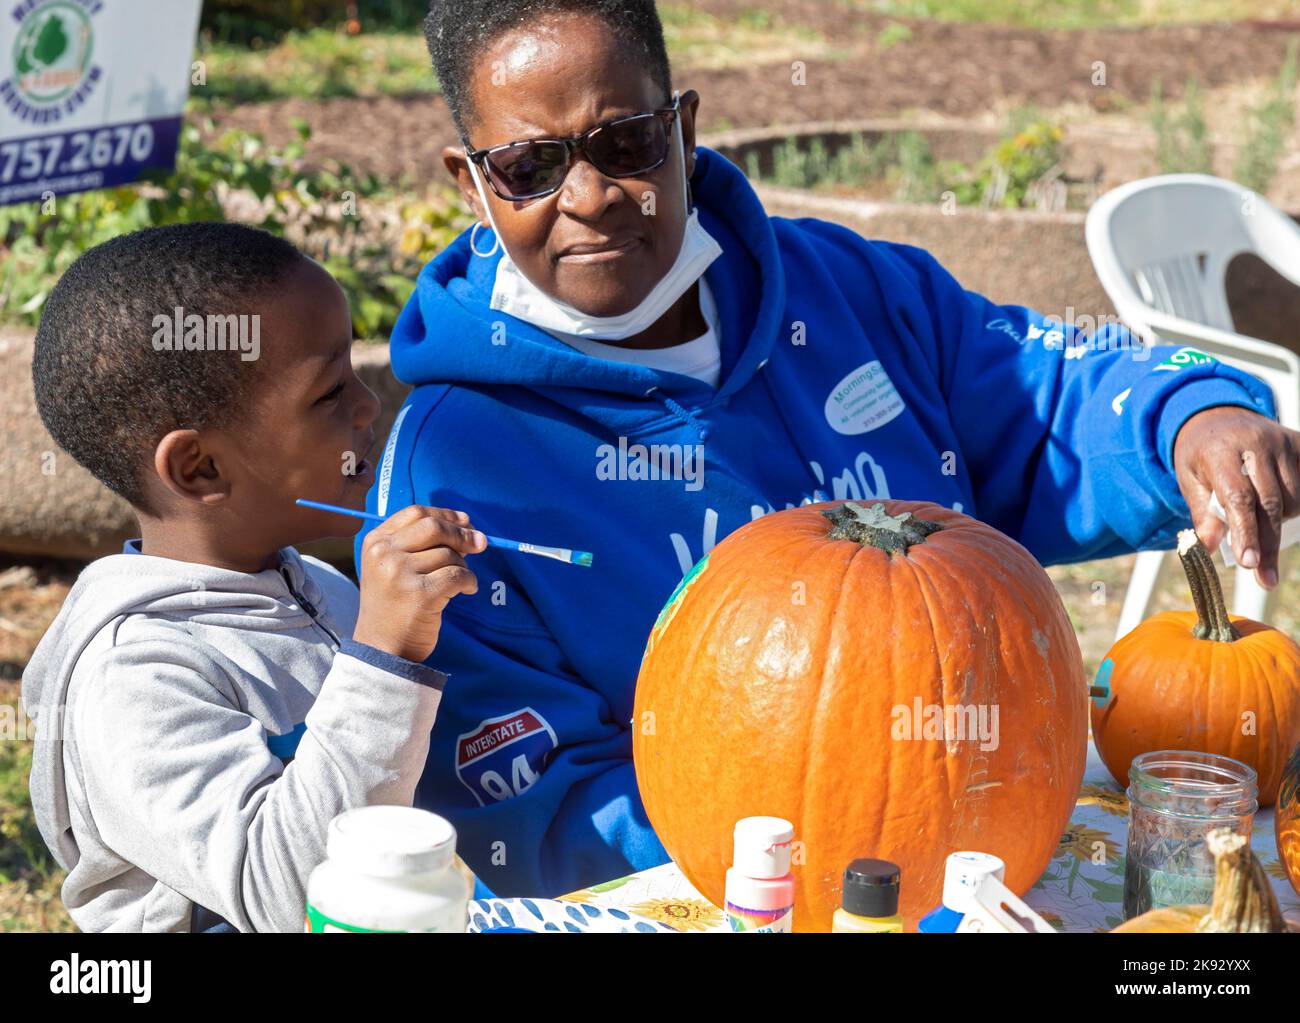 Detroit, Michigan - A fall festival in Detroit's Morningside neighborhood. The event was organized by the Motor City Grounds Crew. Stock Photo